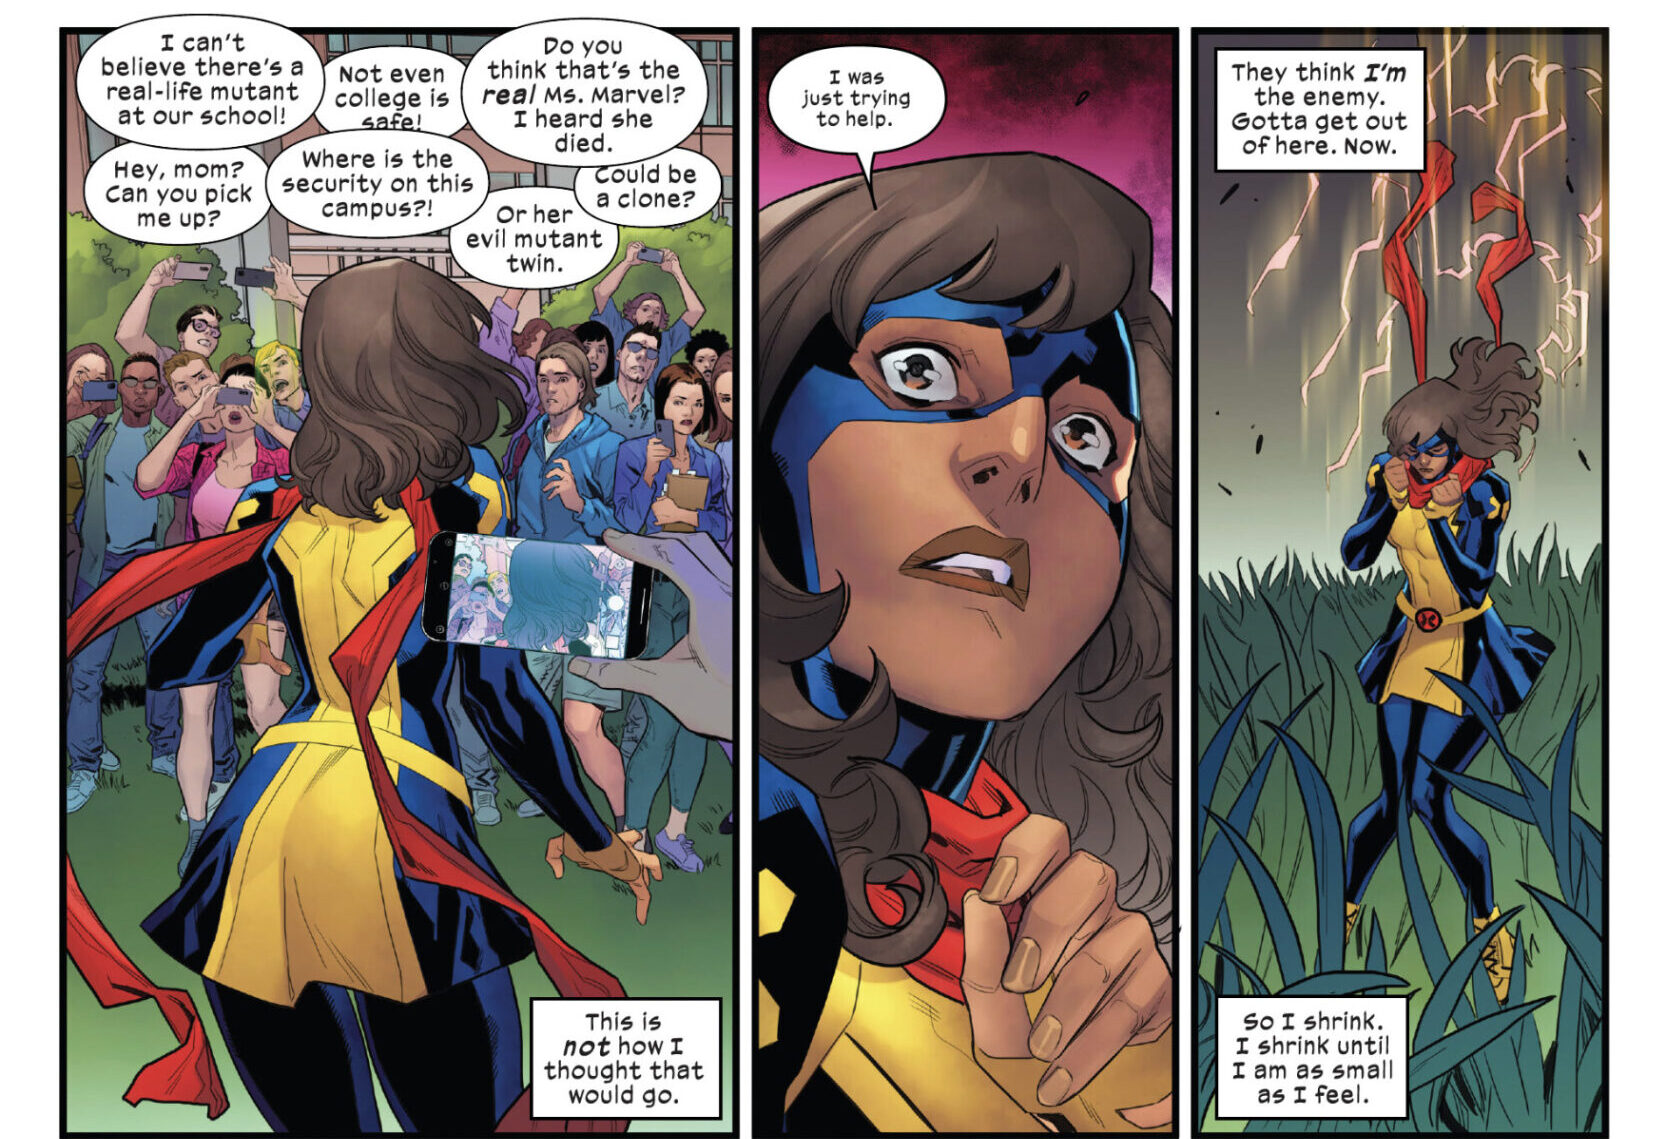 Kamala Khan comes face-to-face with humanity's fear of Mutants in Ms. Marvel: The New Mutant Vol. 1 #1 "The New Normal" (2023), Marvel Comics. Words by Iman Vellani and Sabir Pirzada, art by Carlos Gómez, Adam Gorham, Erick Arciniega, and Joe Caramagna.